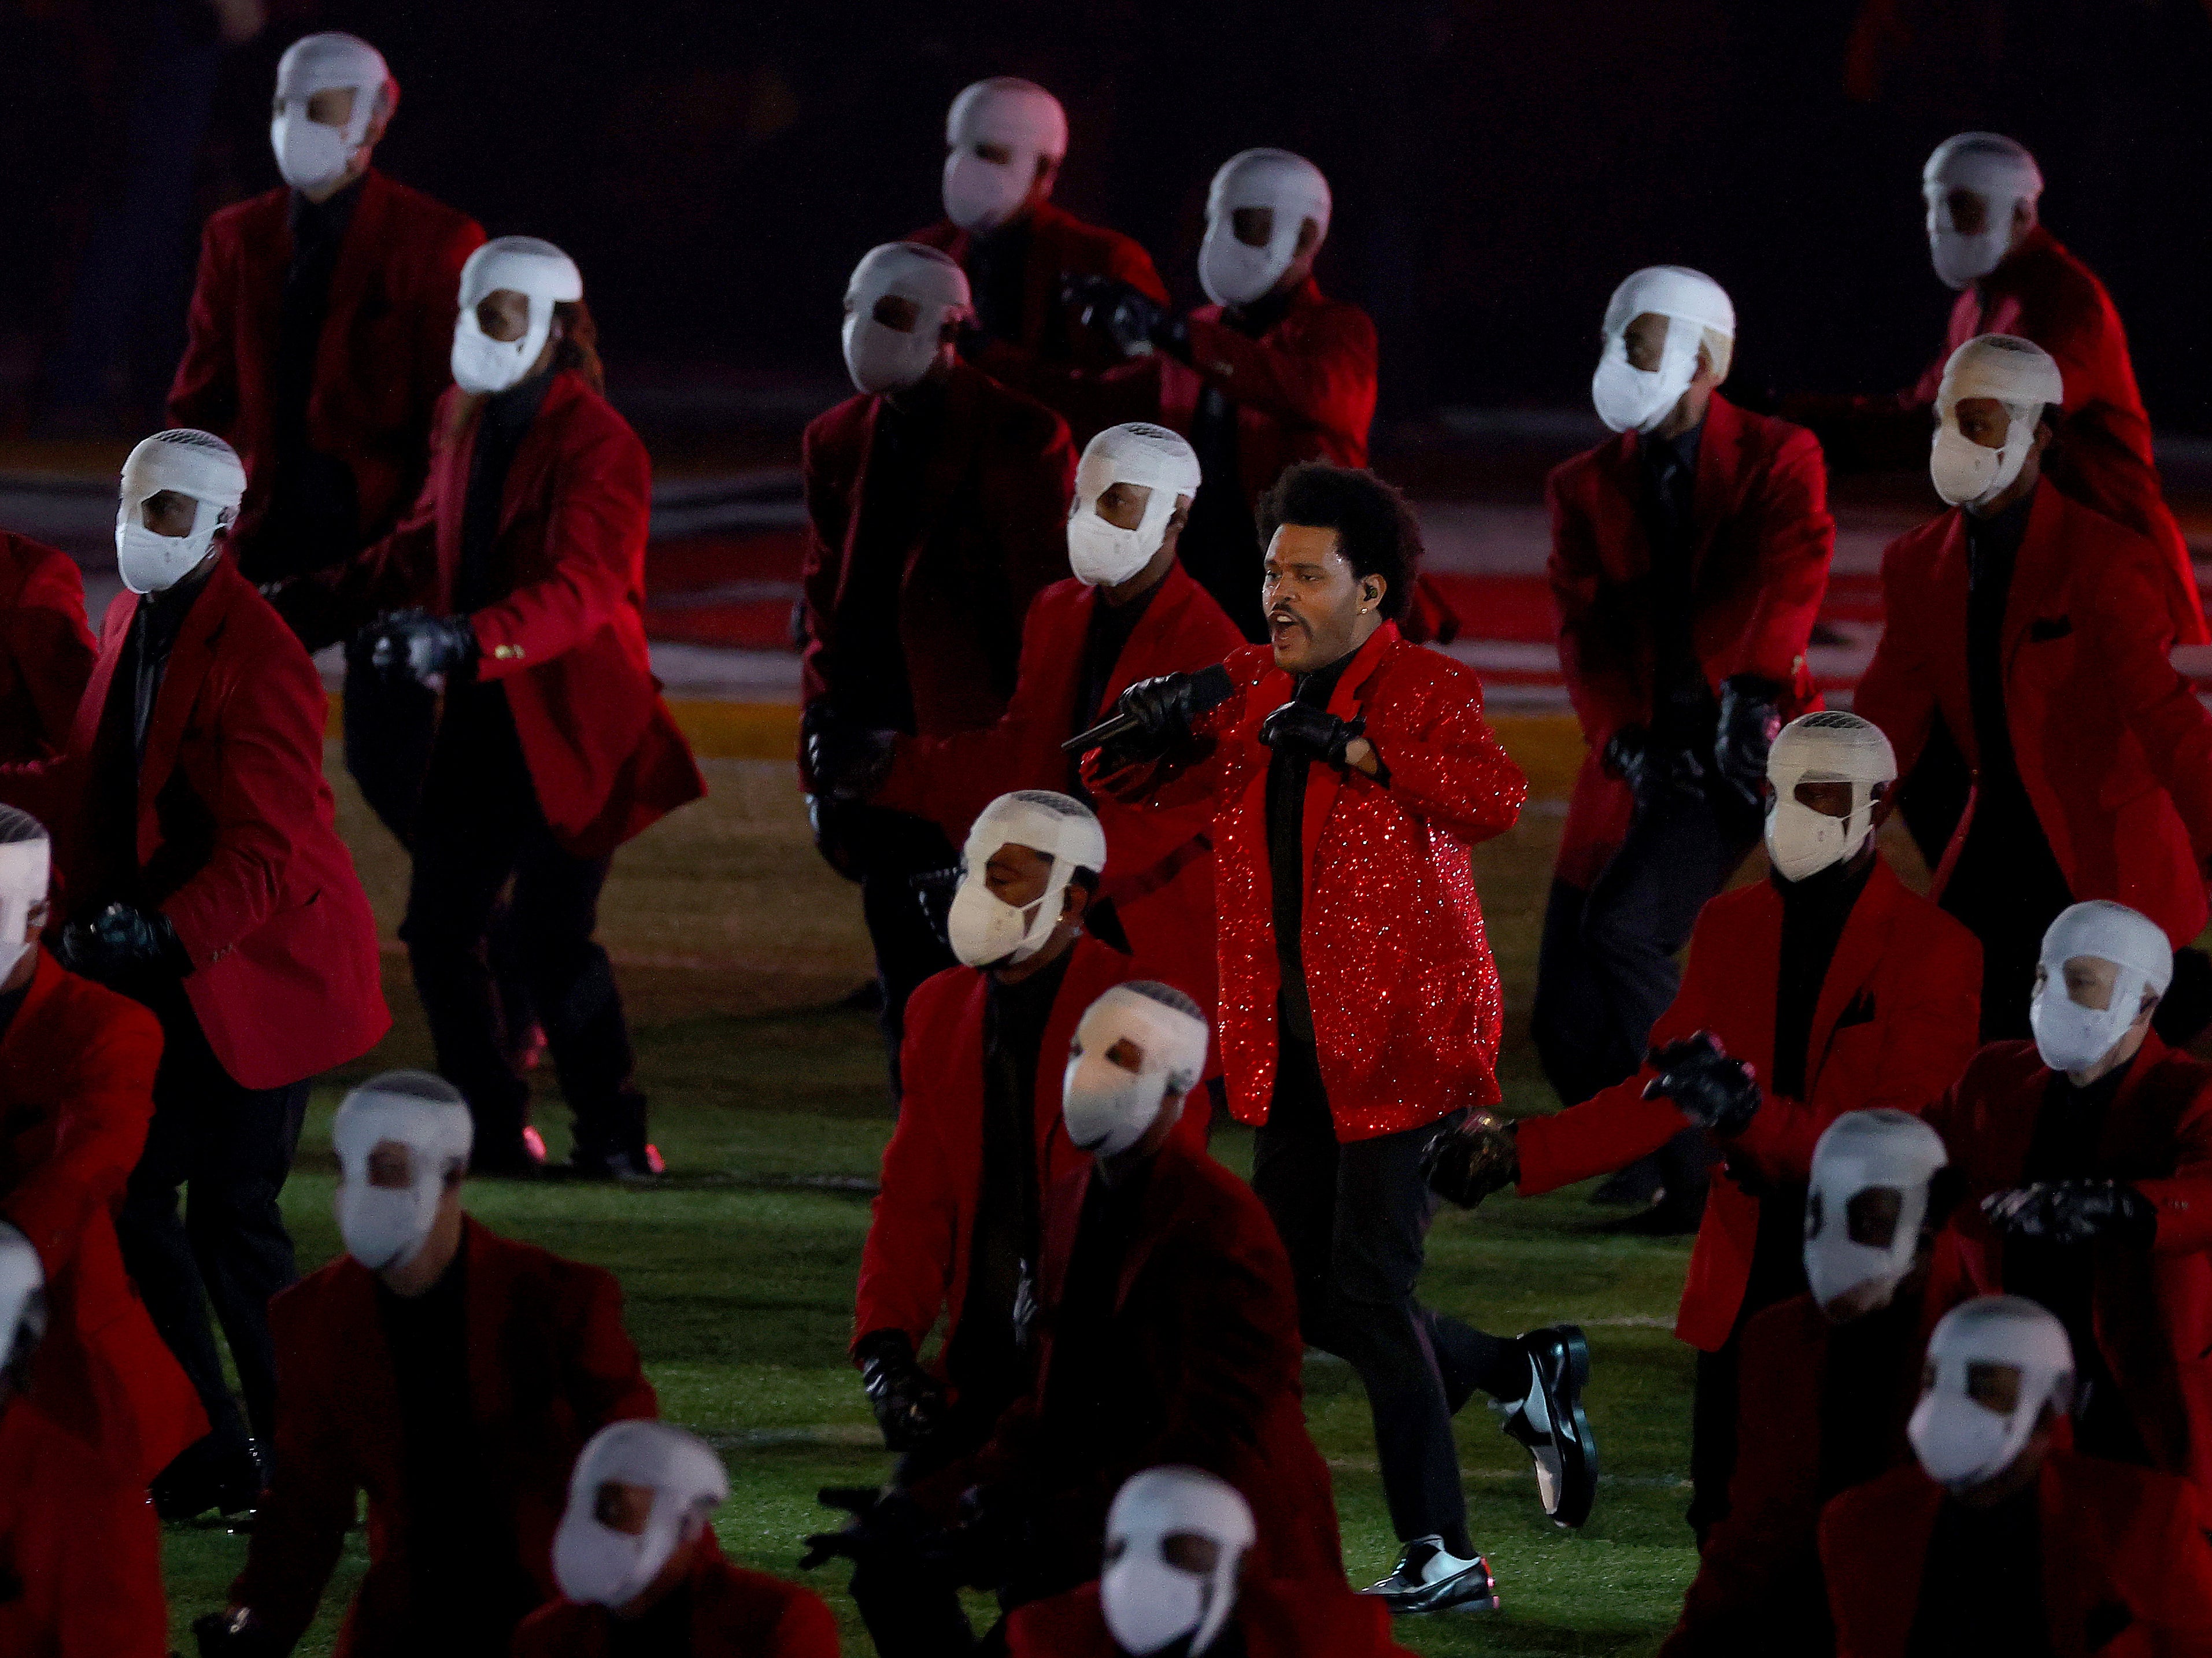 The Weeknd to headline Super Bowl 2021 half-time show, The Weeknd